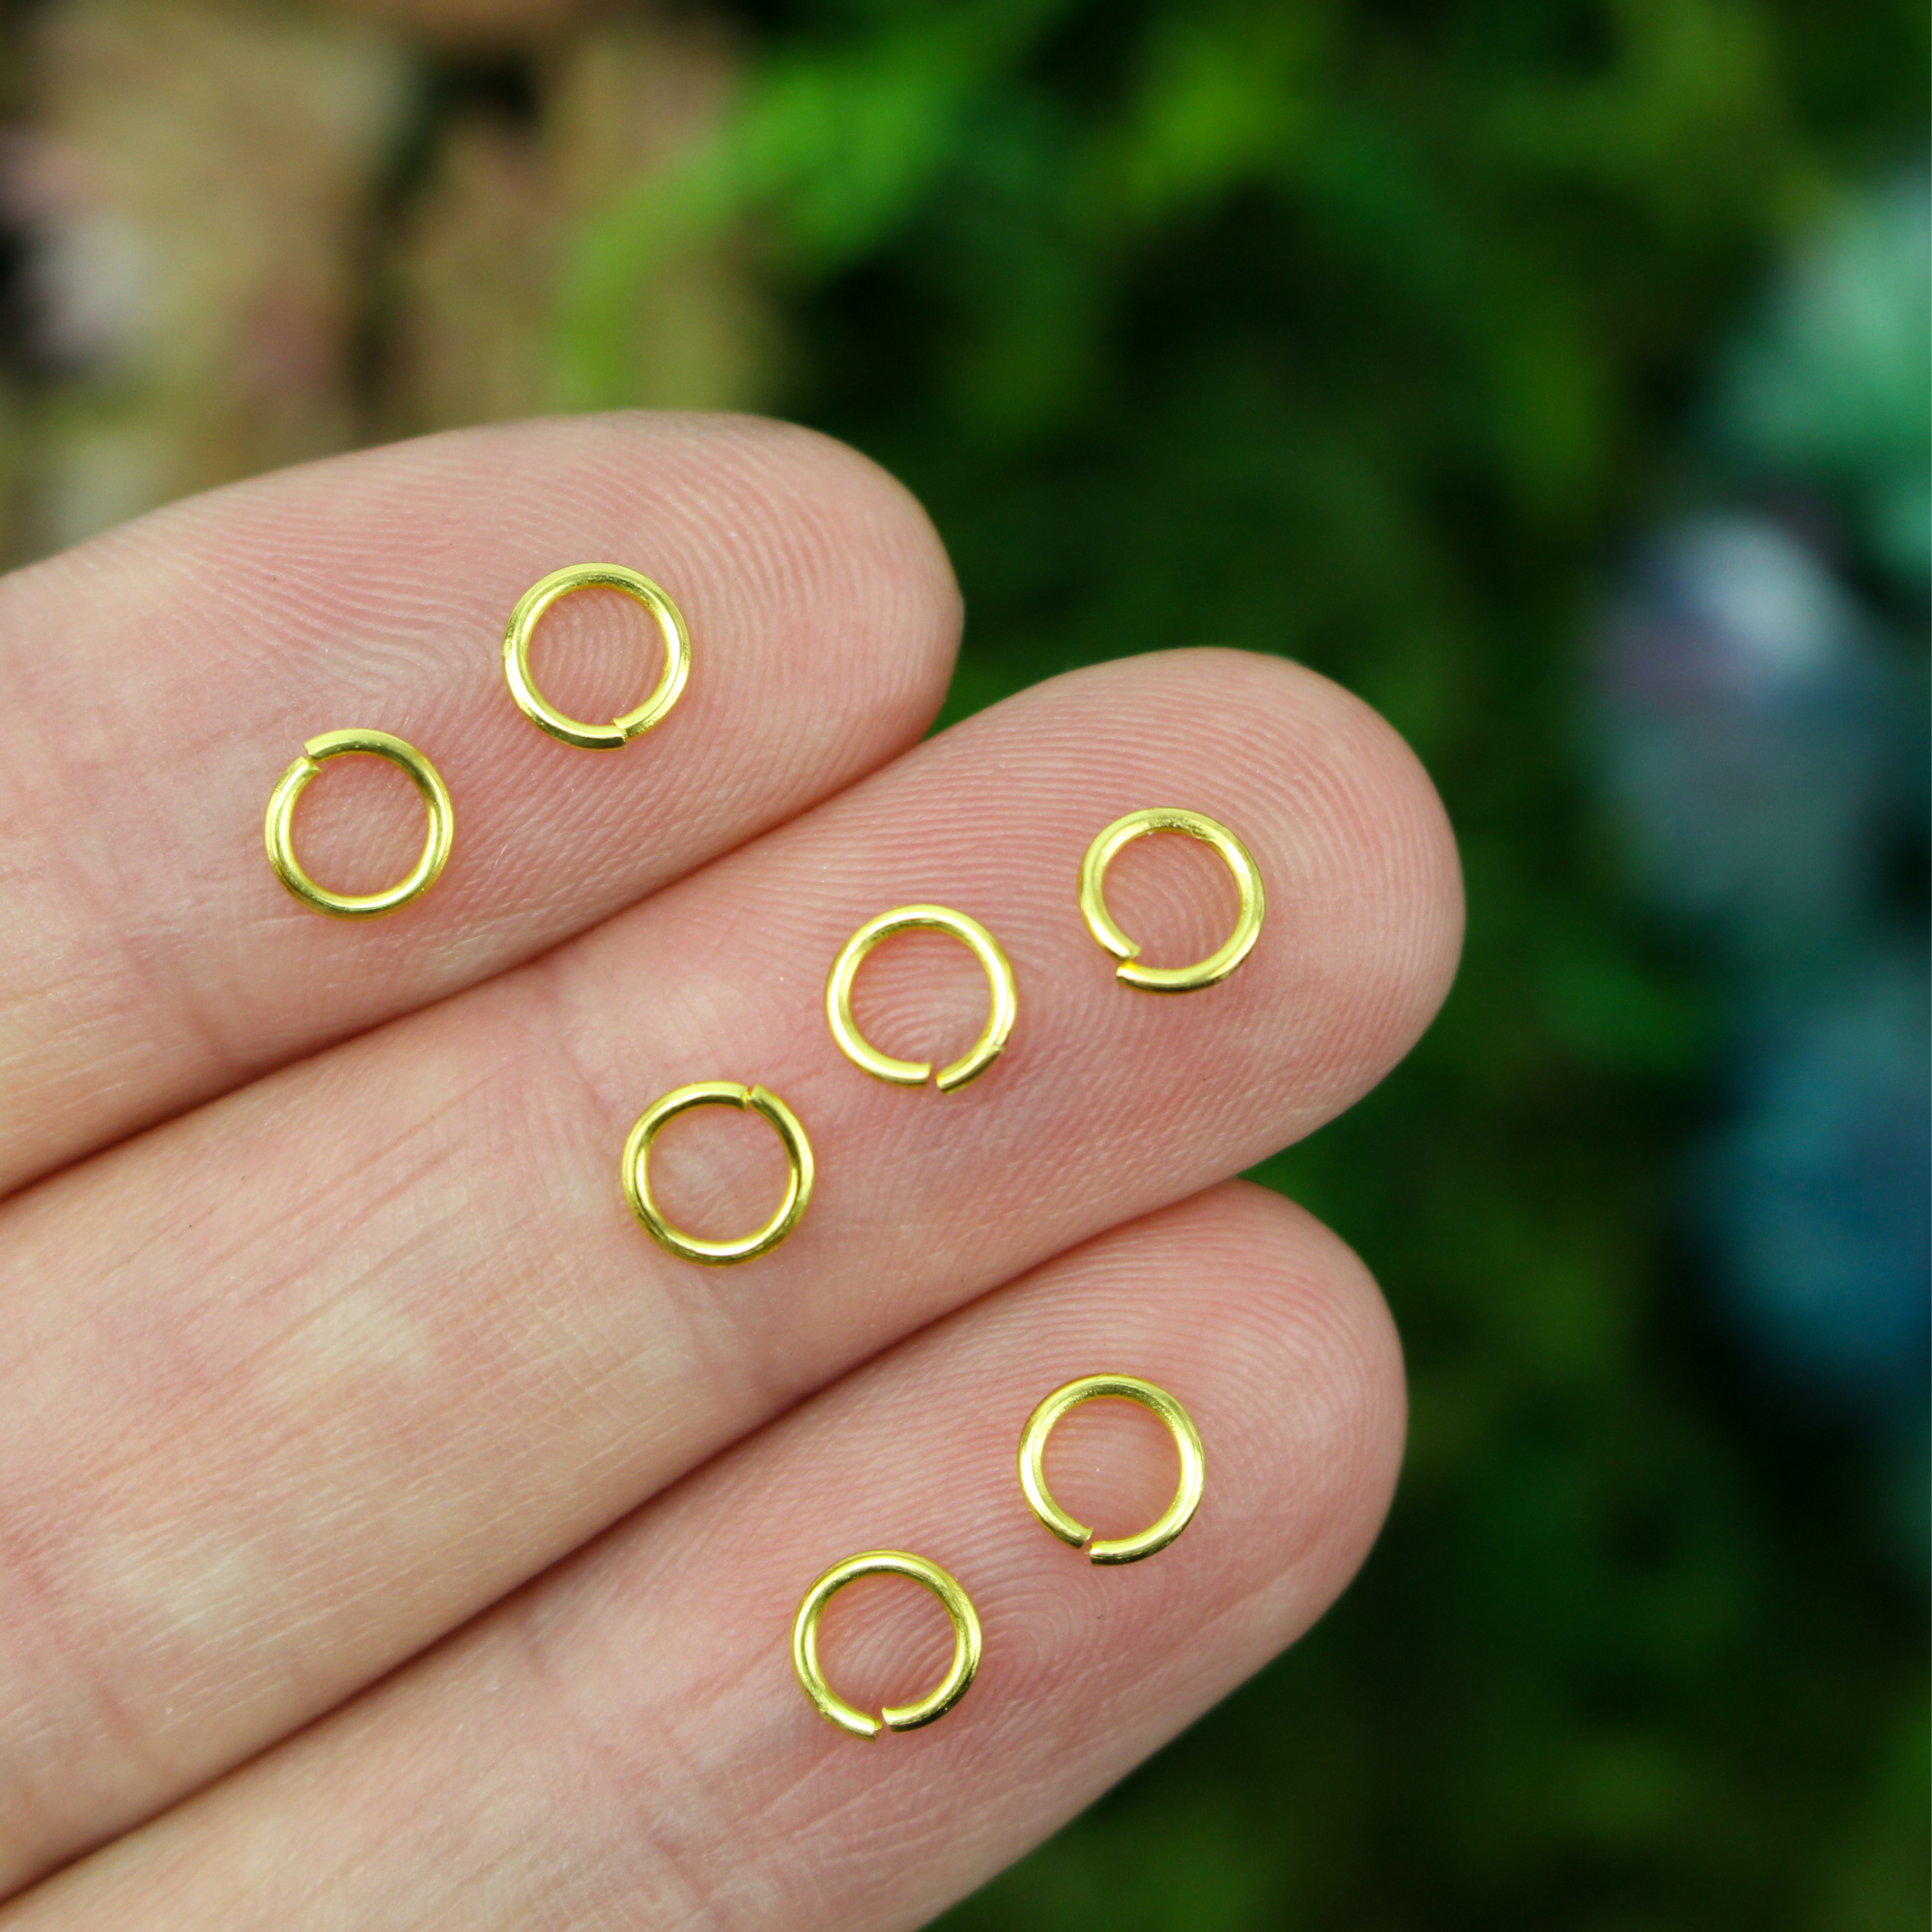 5mm Gold Plated Iron Jump Rings, 100pcs